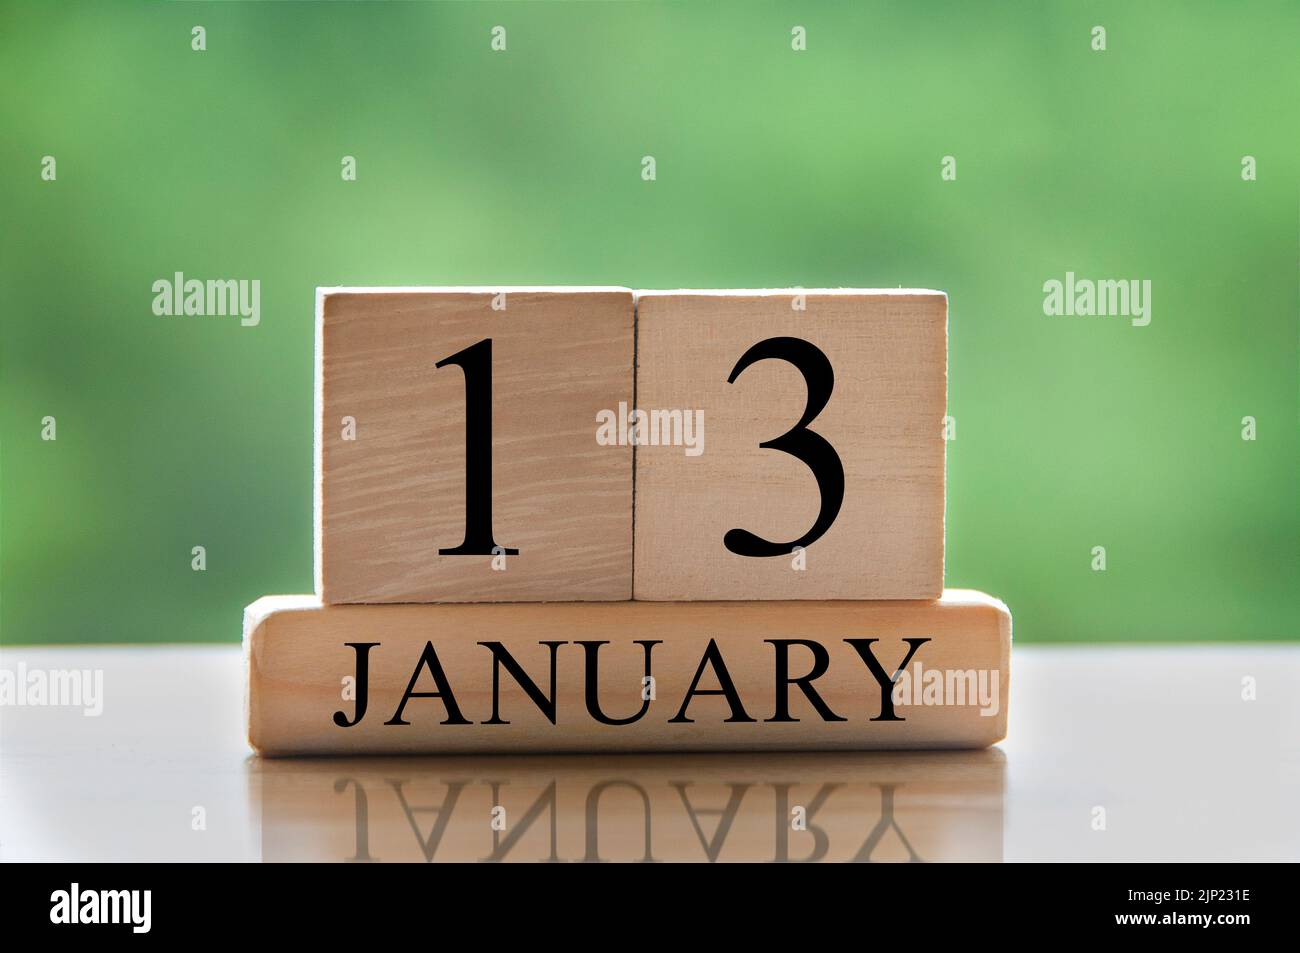 January 13 calendar date text on wooden blocks with blurred background